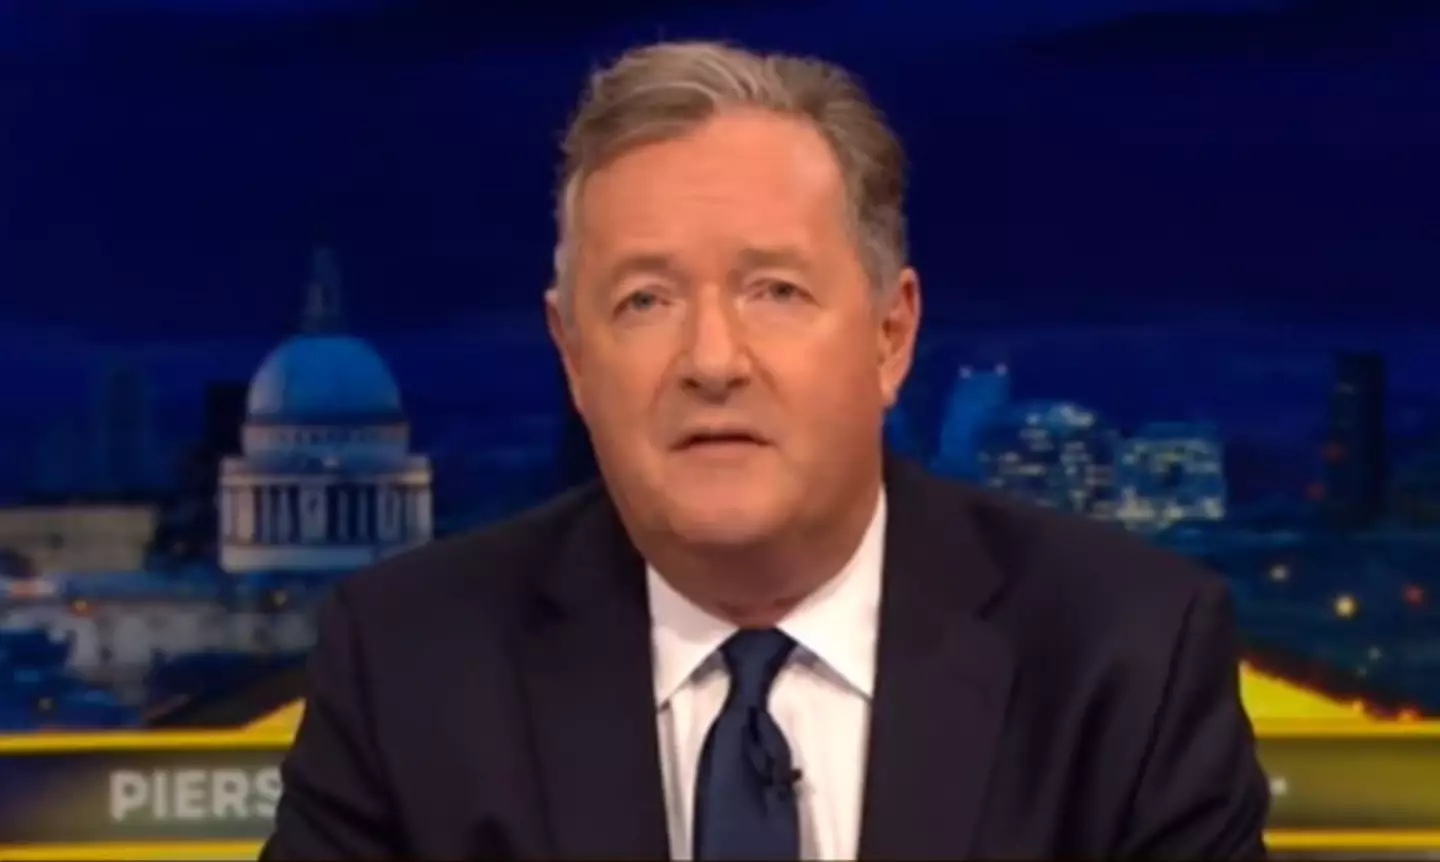 Piers discussed the scandal on his talk show Uncensored.